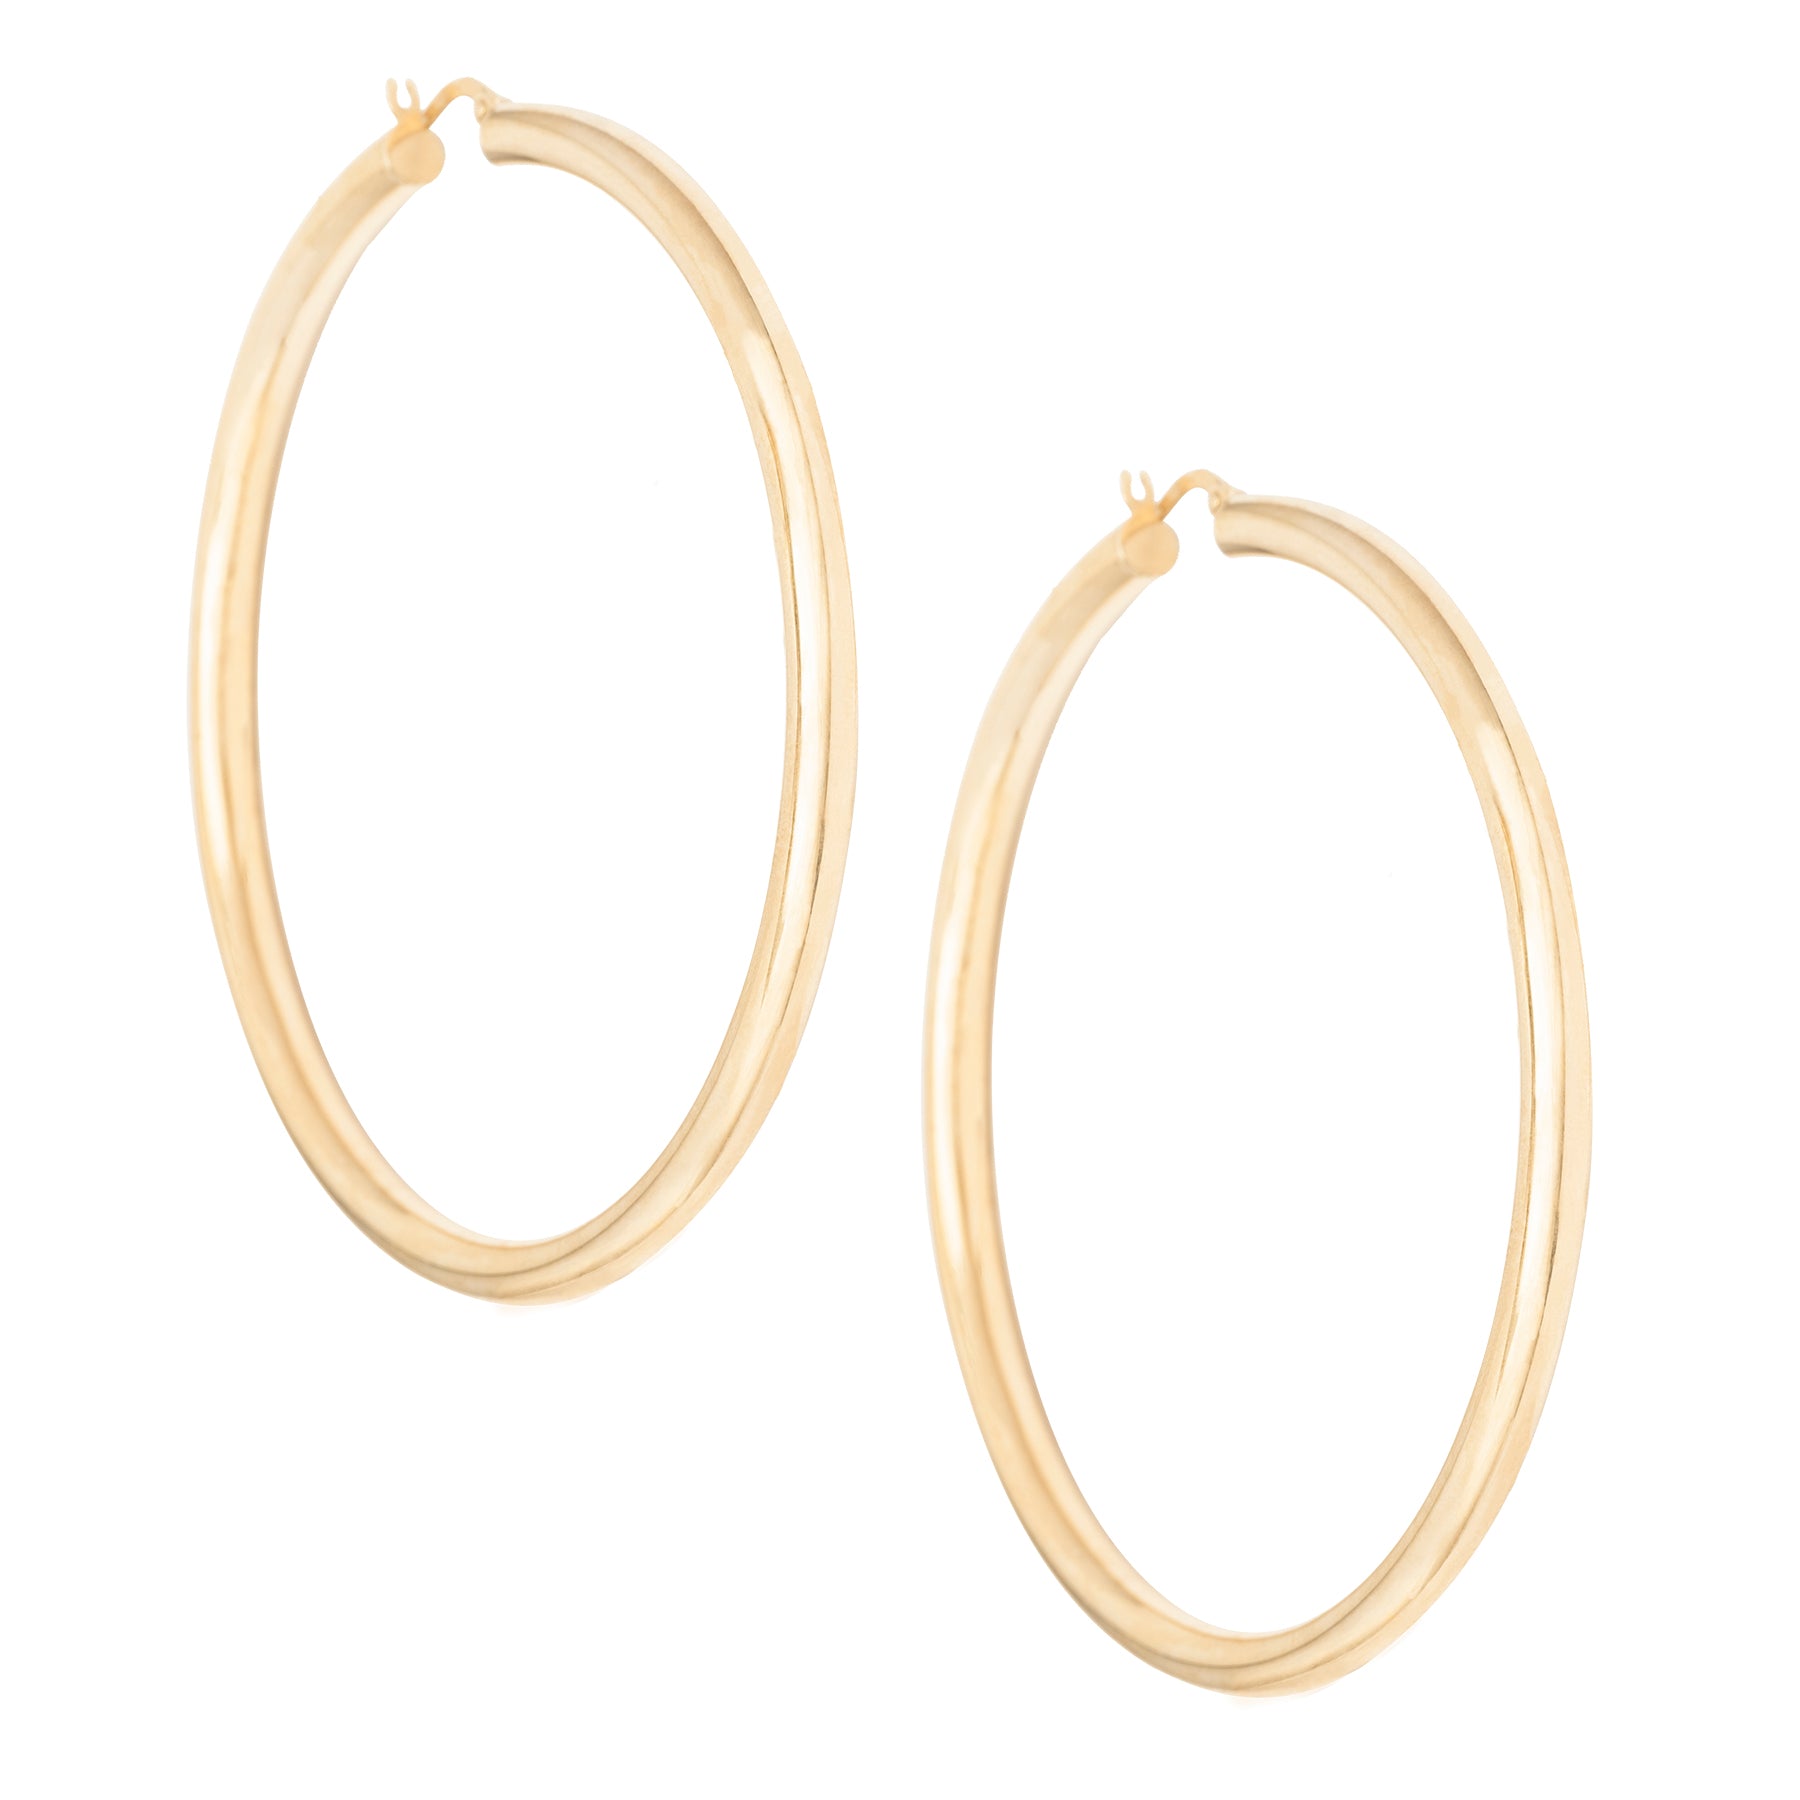 2" 4MM Thick Gold Hoops - Nina Segal Jewelry